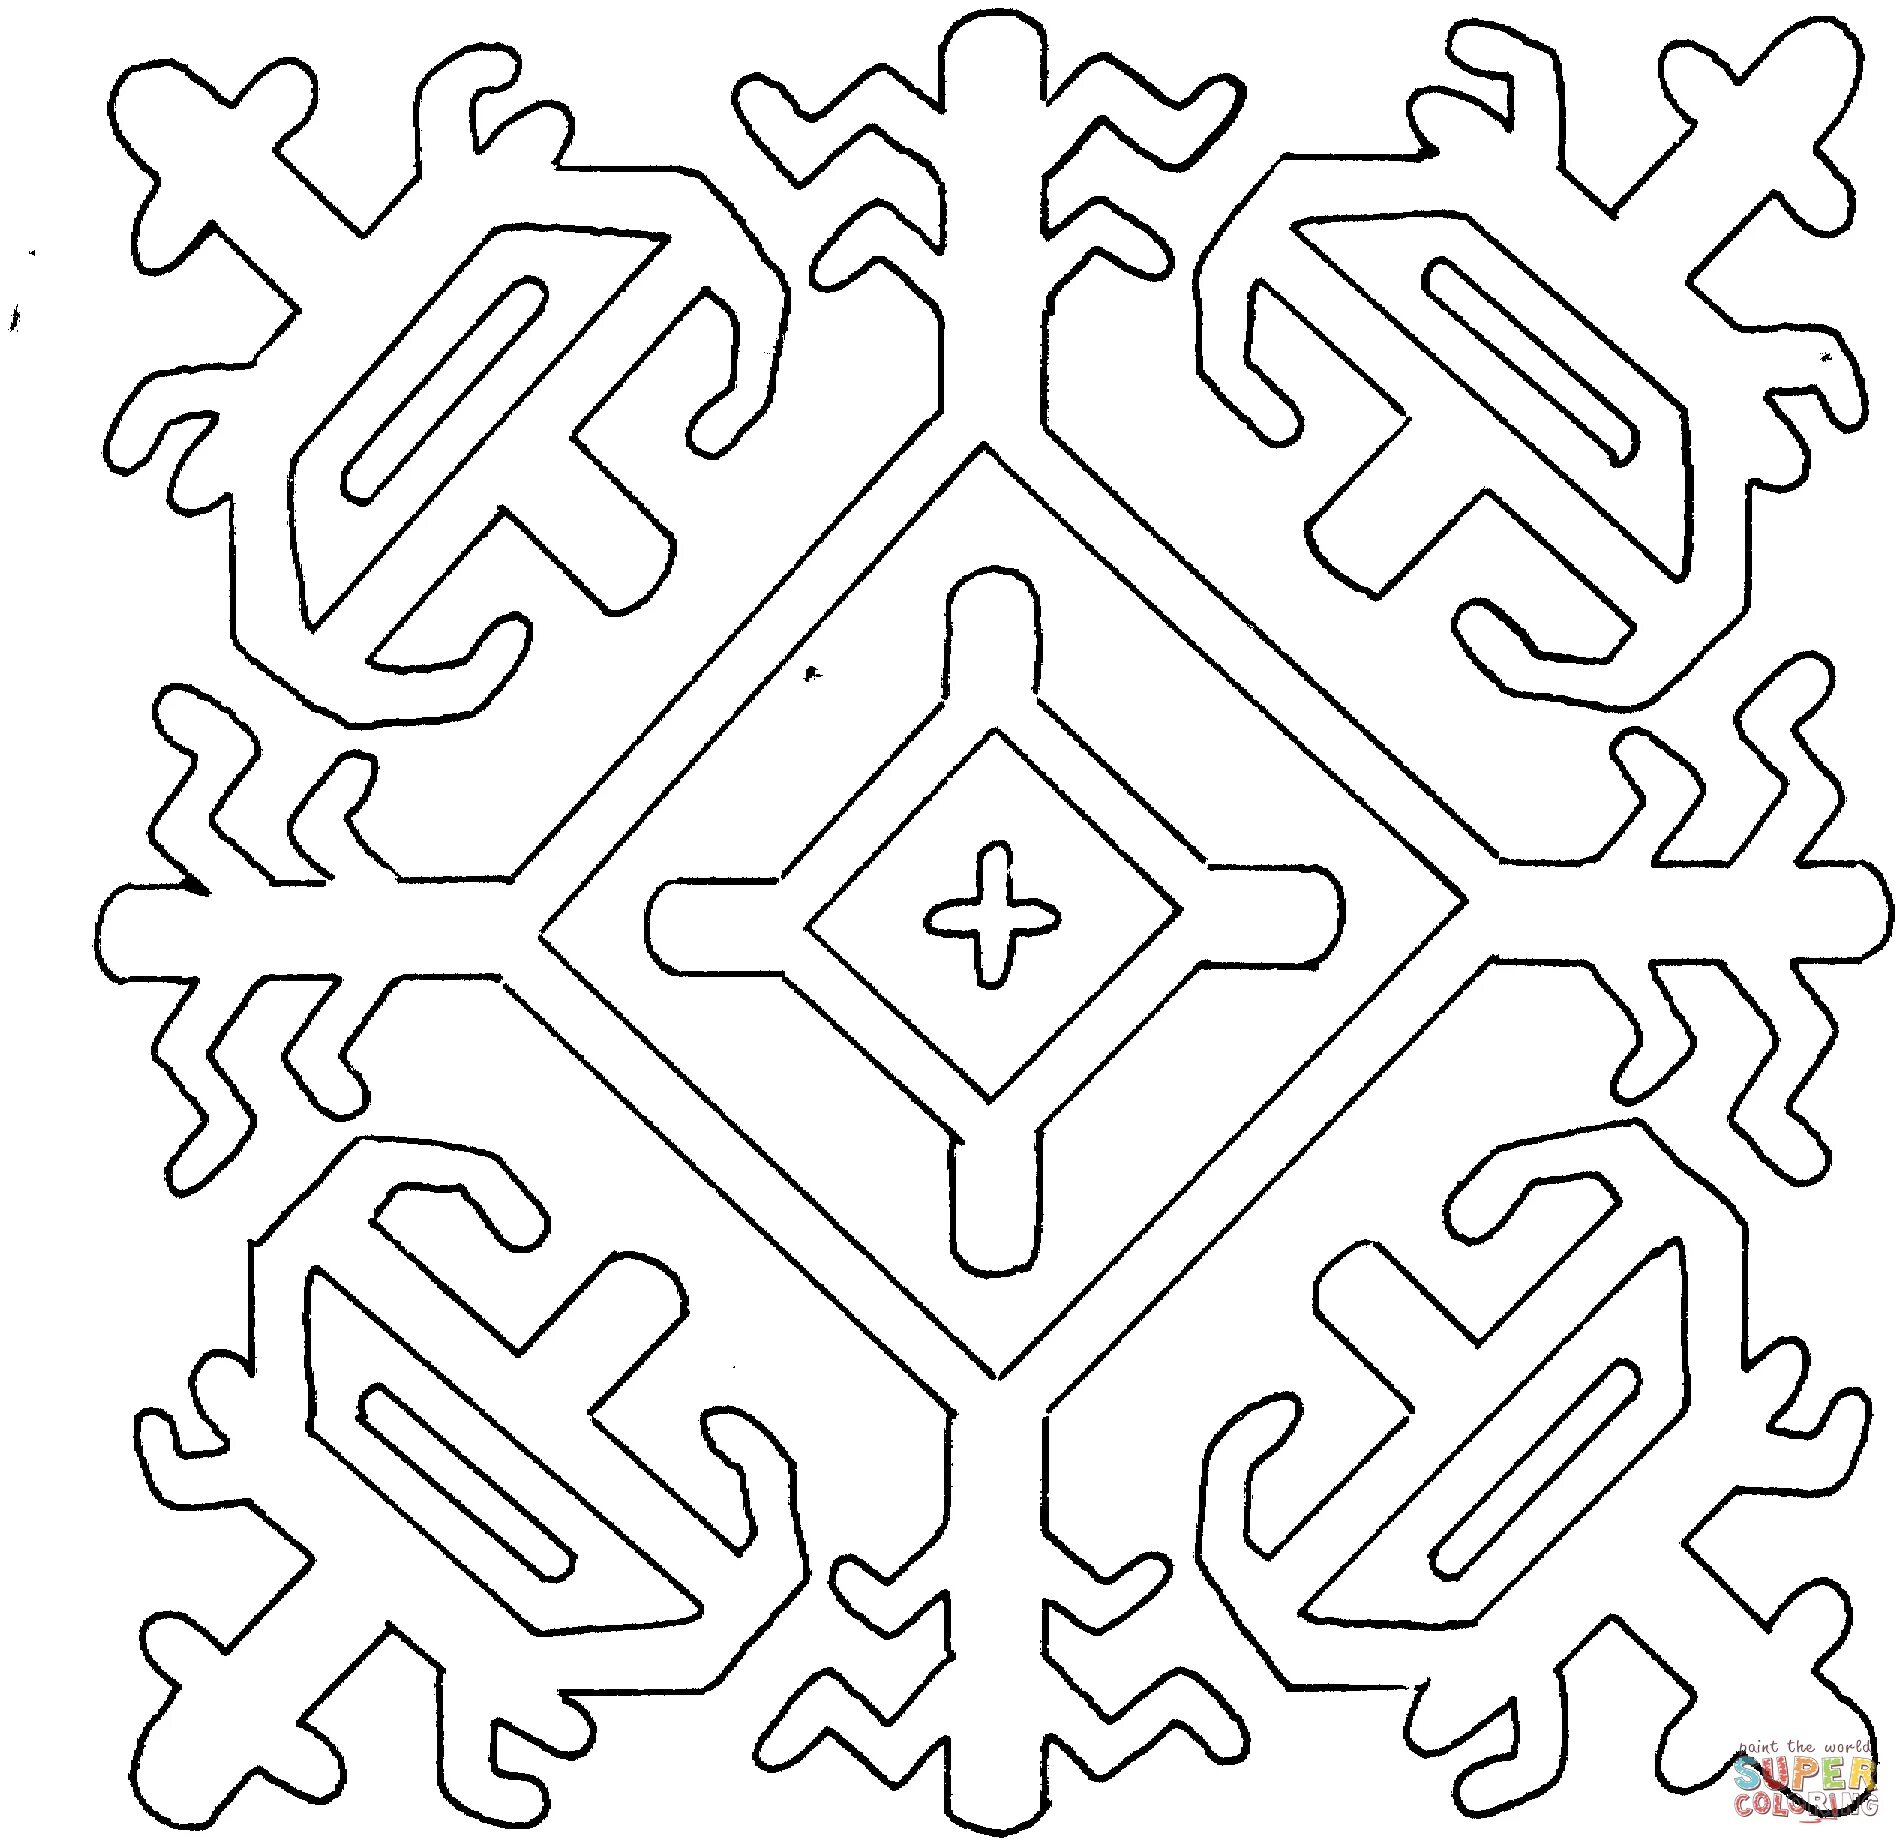 Chuvash patterns and ornaments for children #13